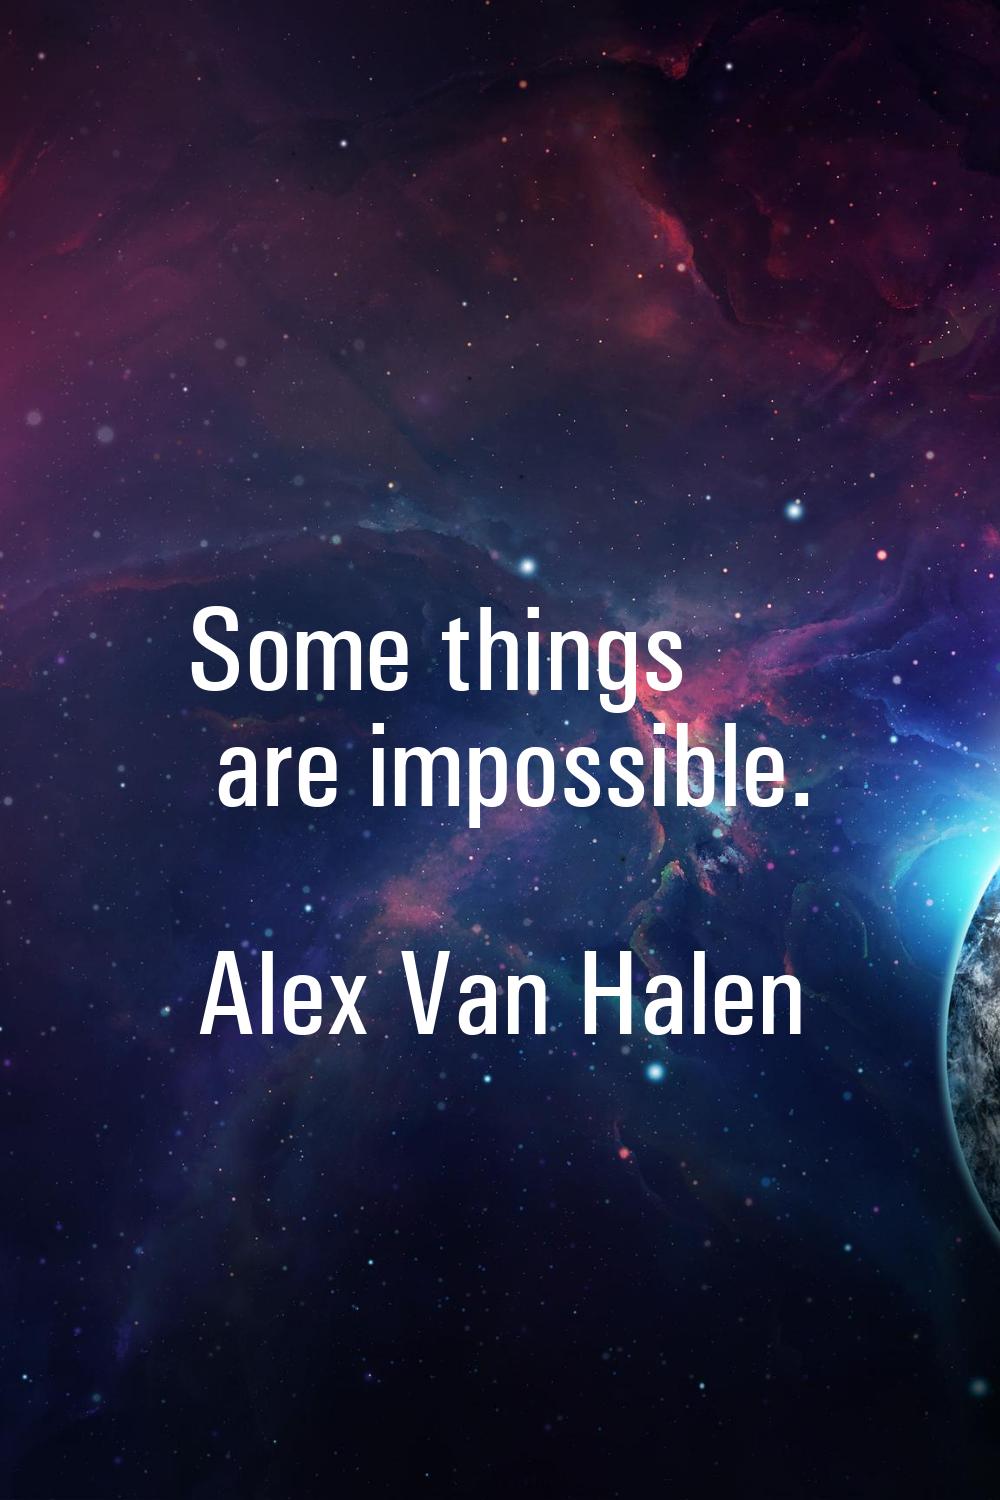 Some things are impossible.